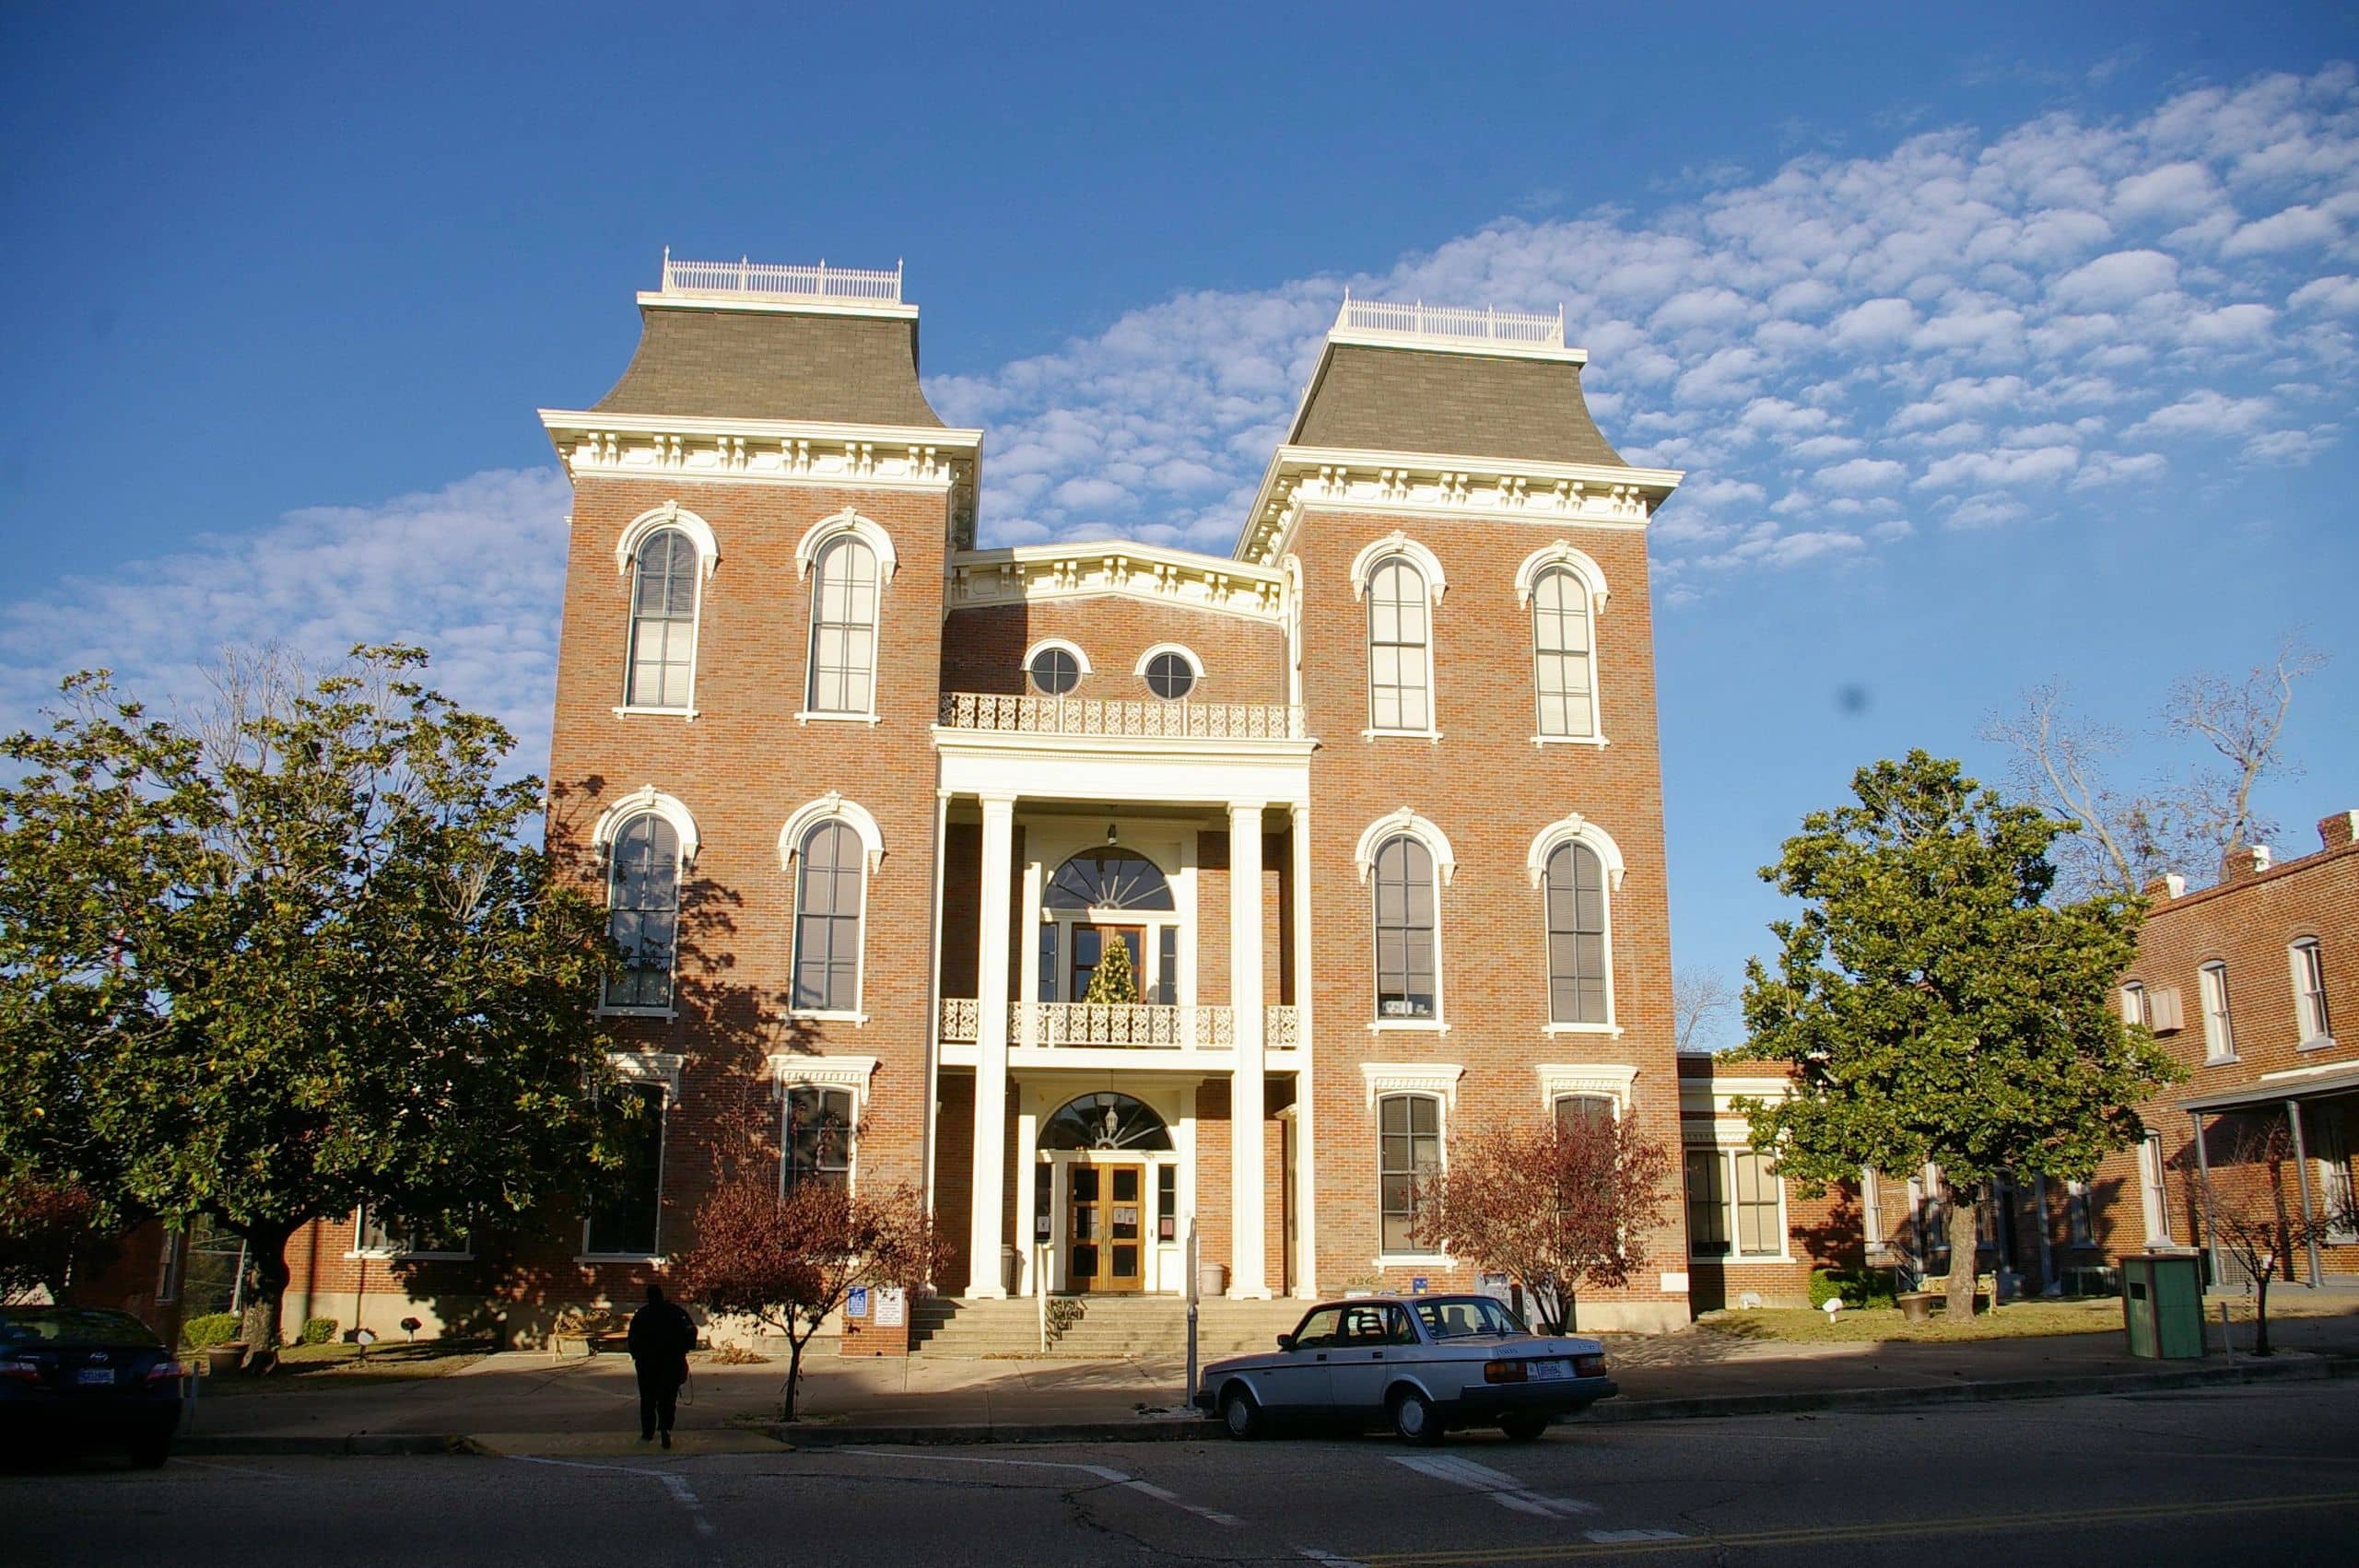 Image of Bullock County Revenue Commissioner Bullock County Courthouse